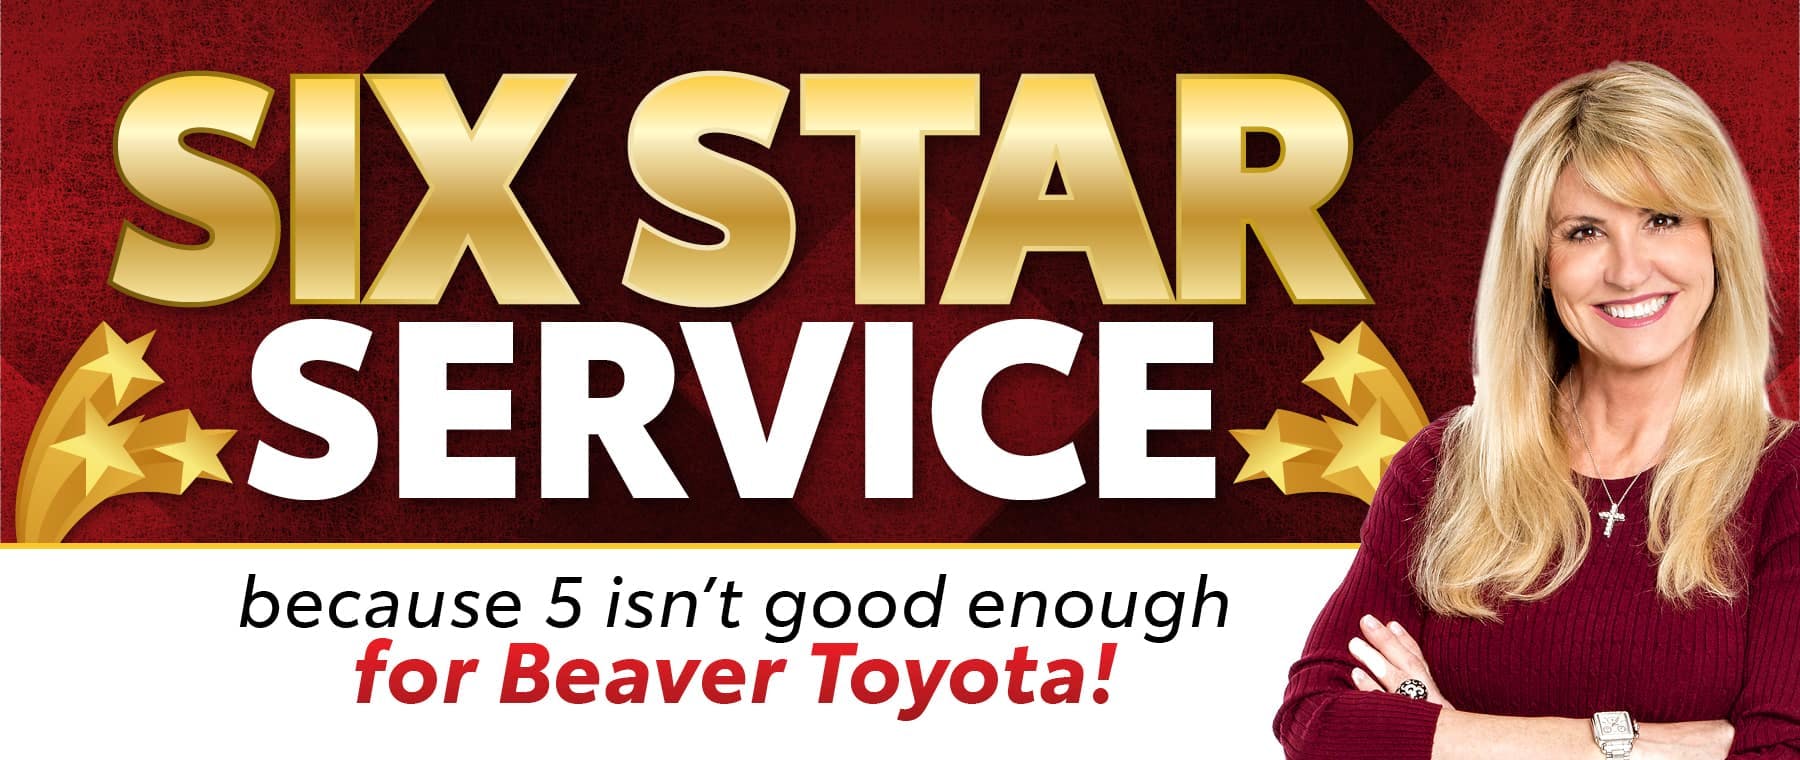 6 star rating service